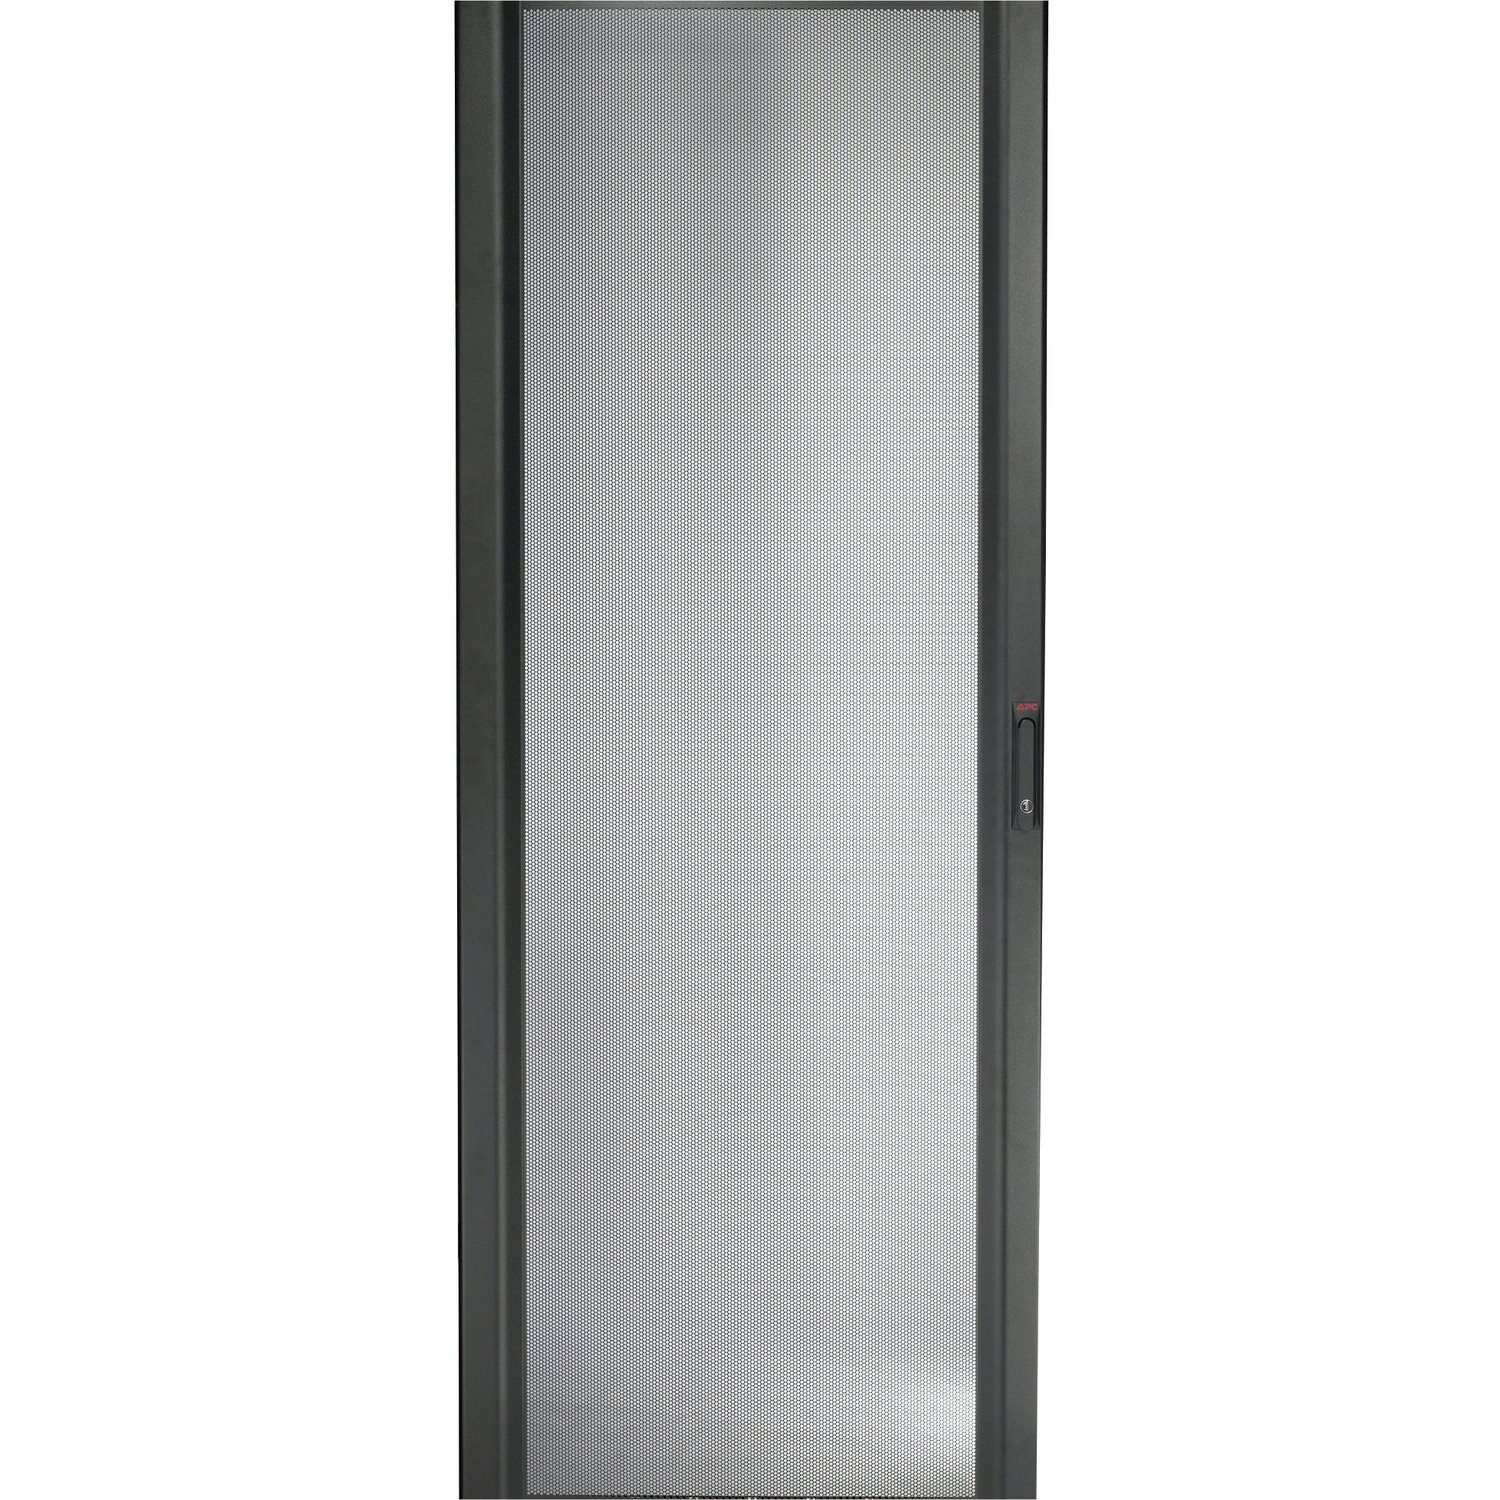 APC by Schneider Electric NetShelter SX 45U 600mm Wide Perforated Curved Door Black